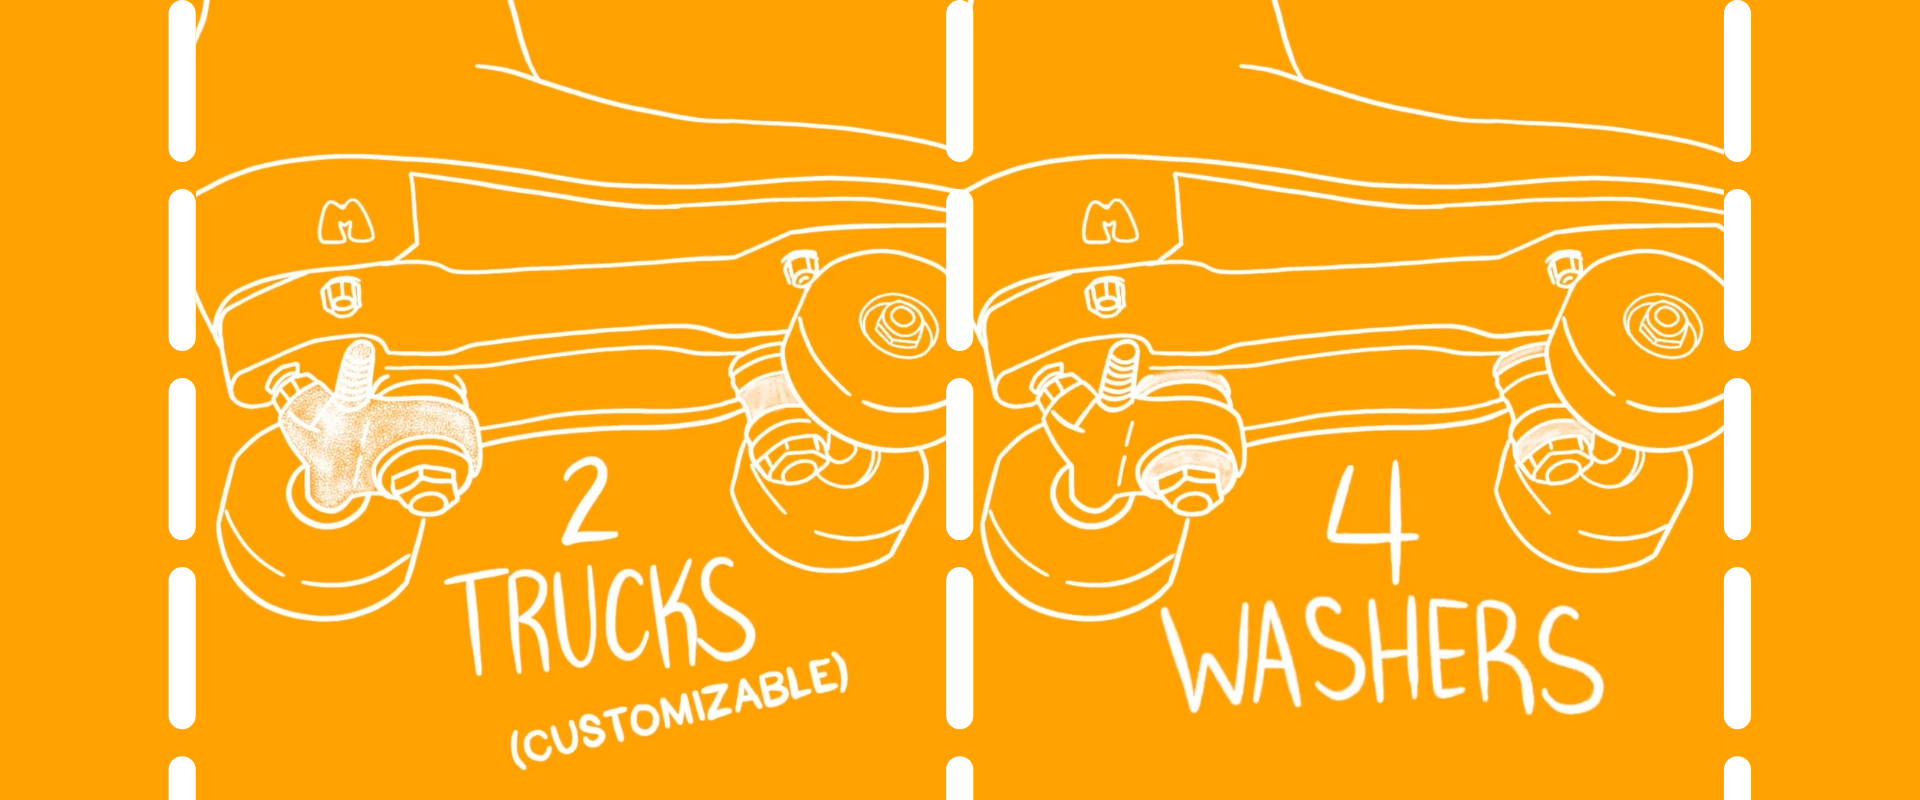 Diagram of 2 trucks that are customizable and 4 washers.